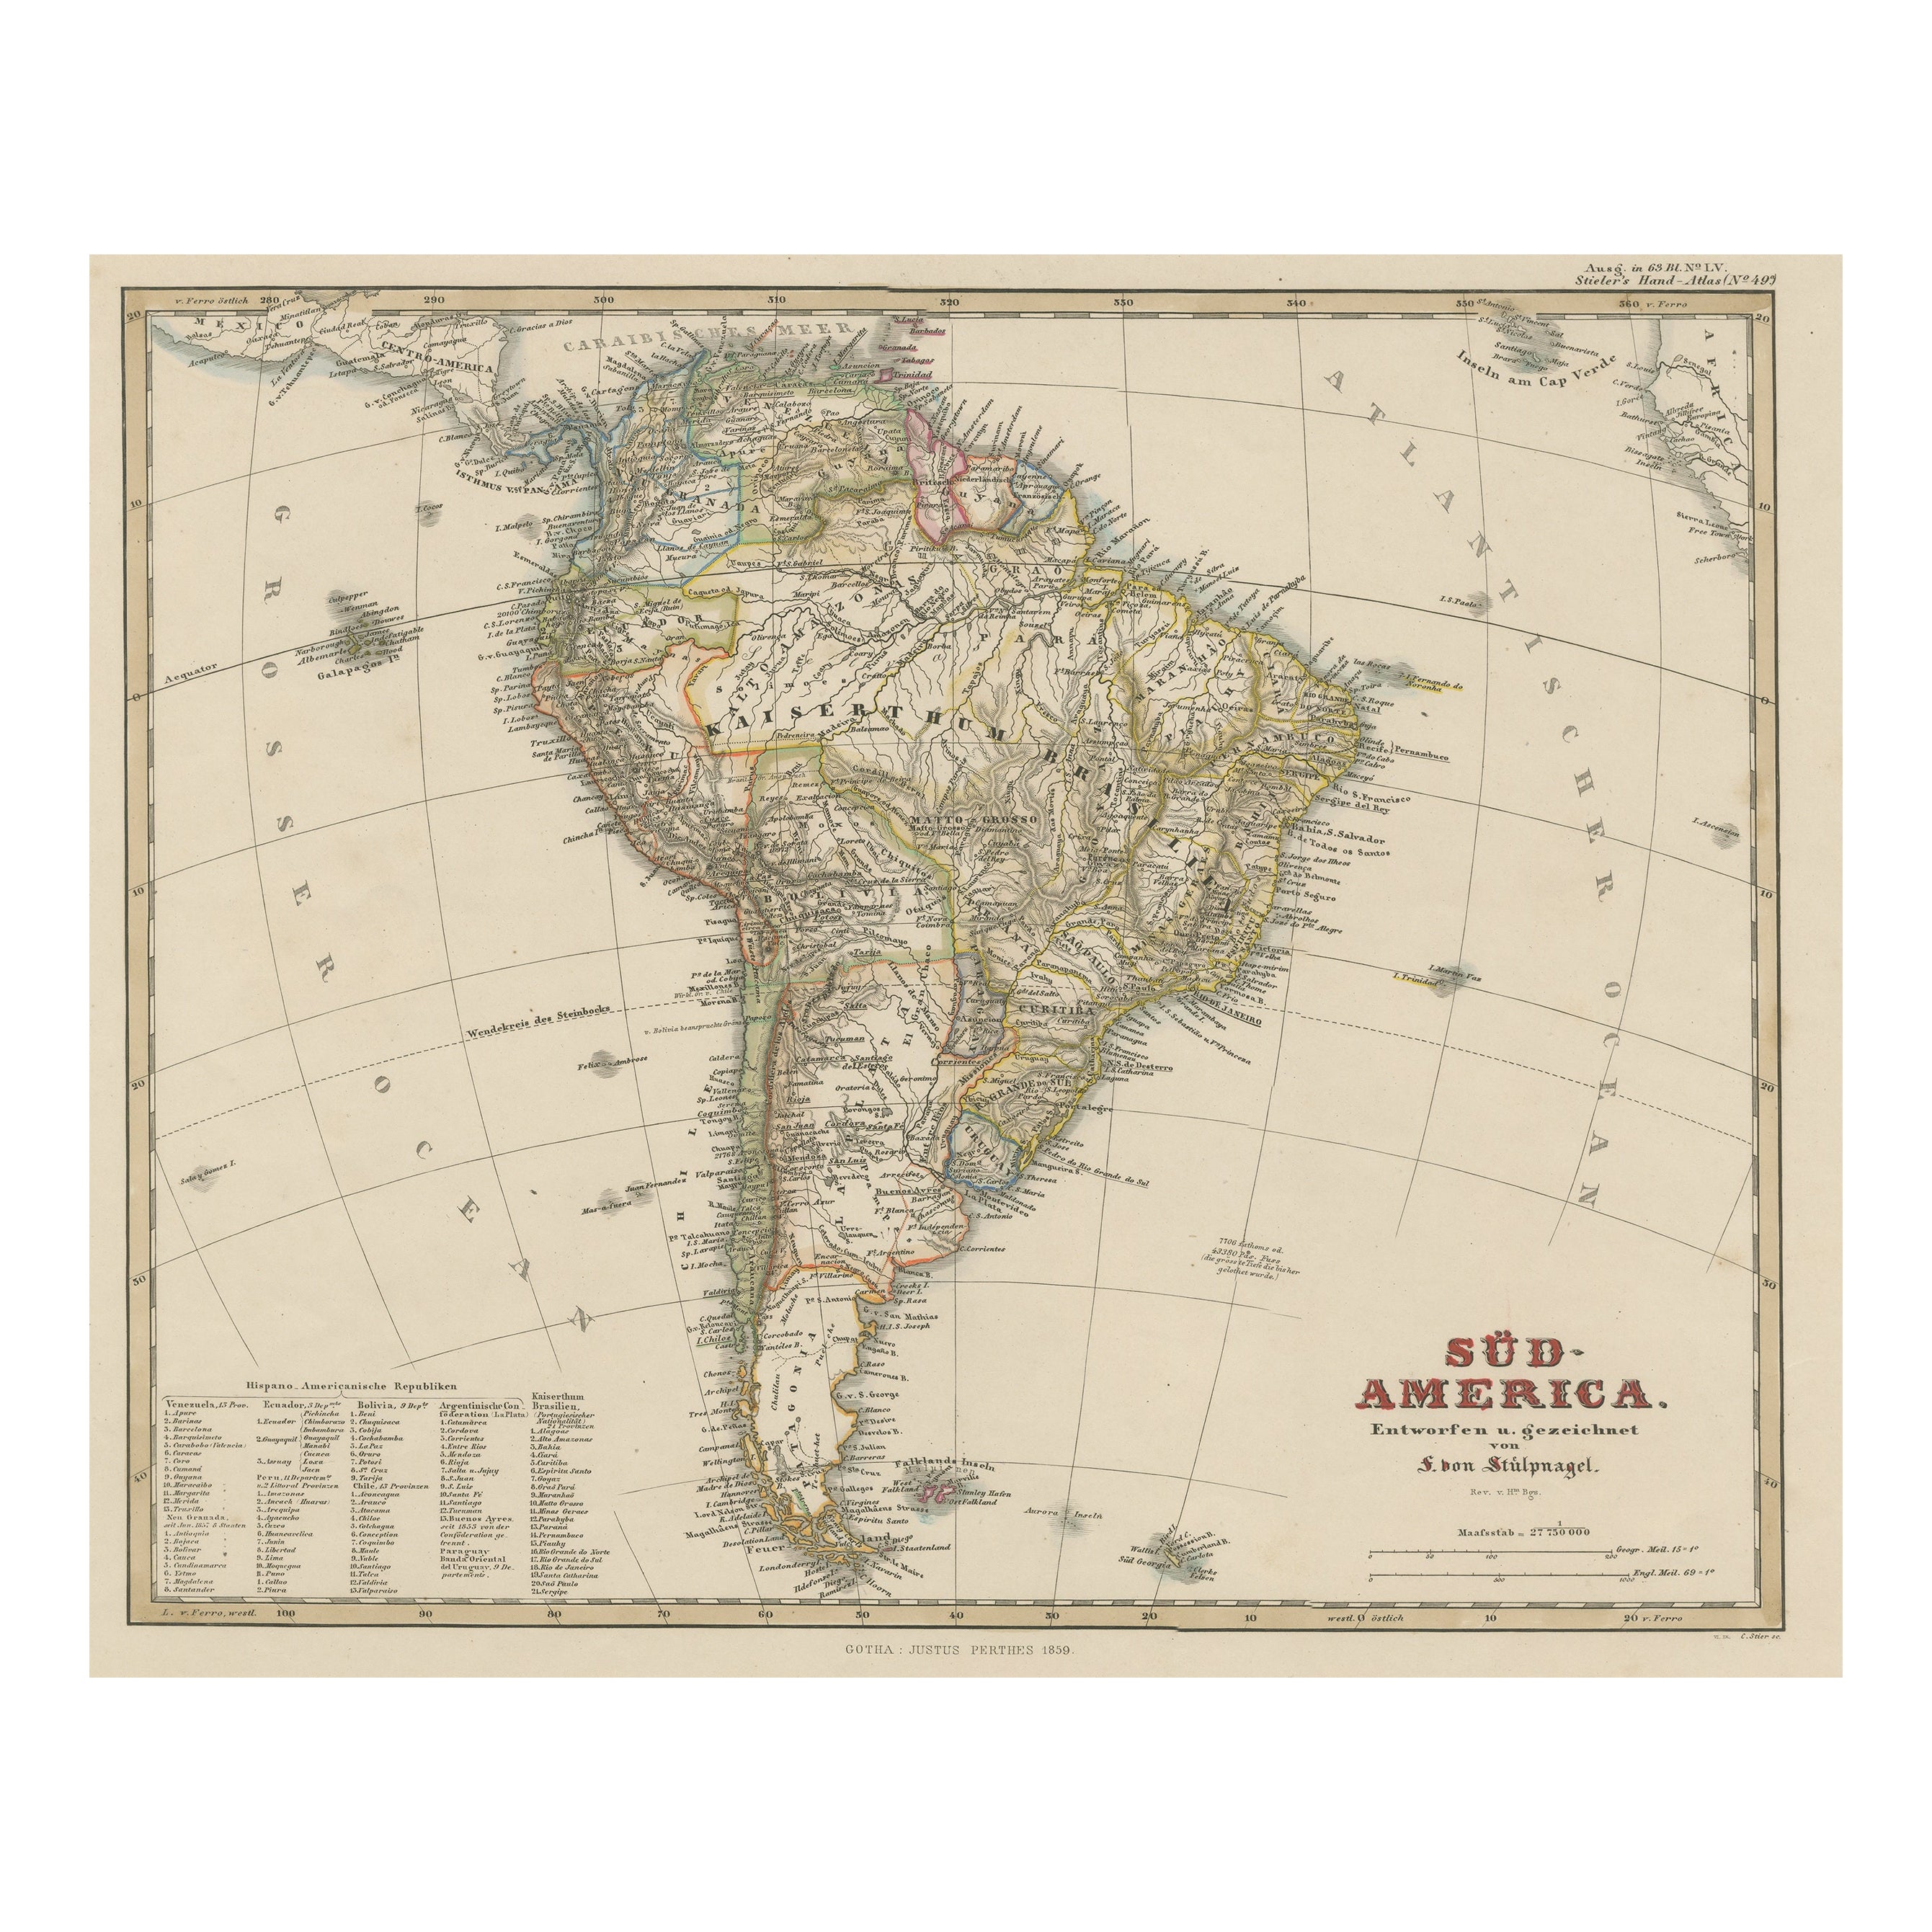 Antique Map of South America with Many Details, ca.1859